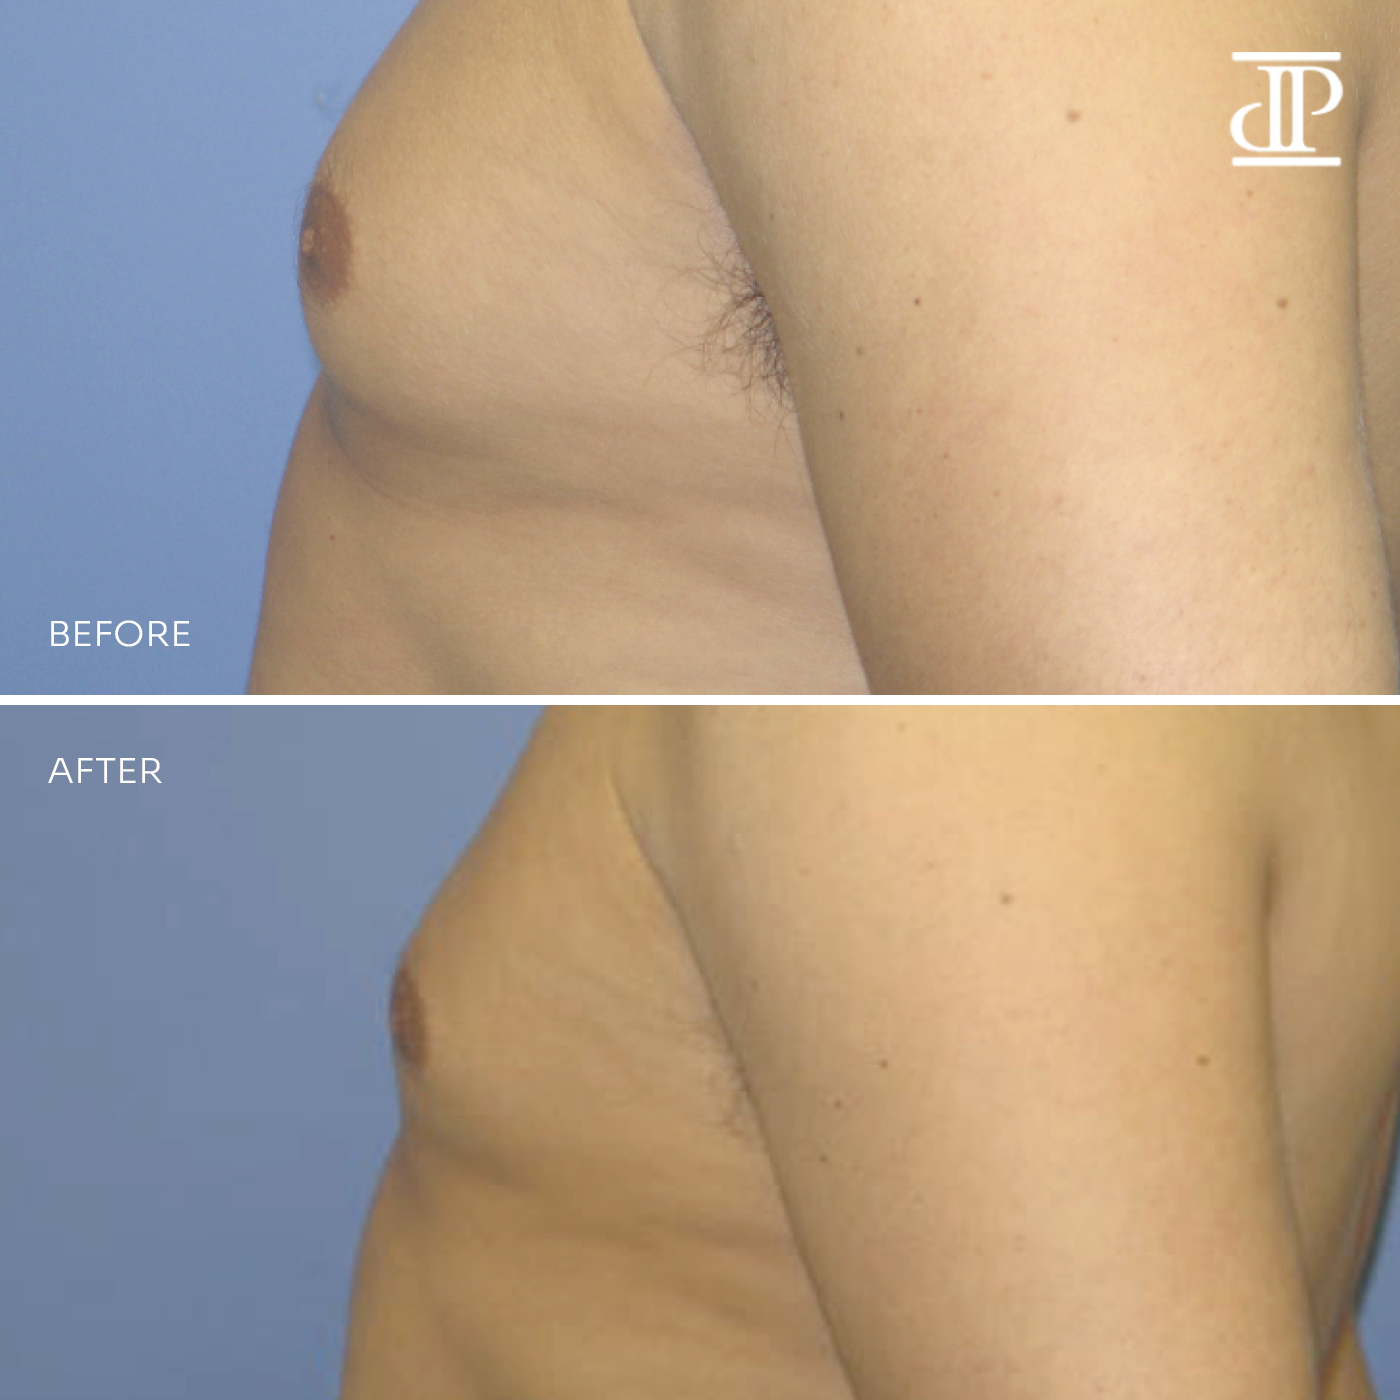 Breast Lift with Reduction West Island, Montreal - Plastic Surgery